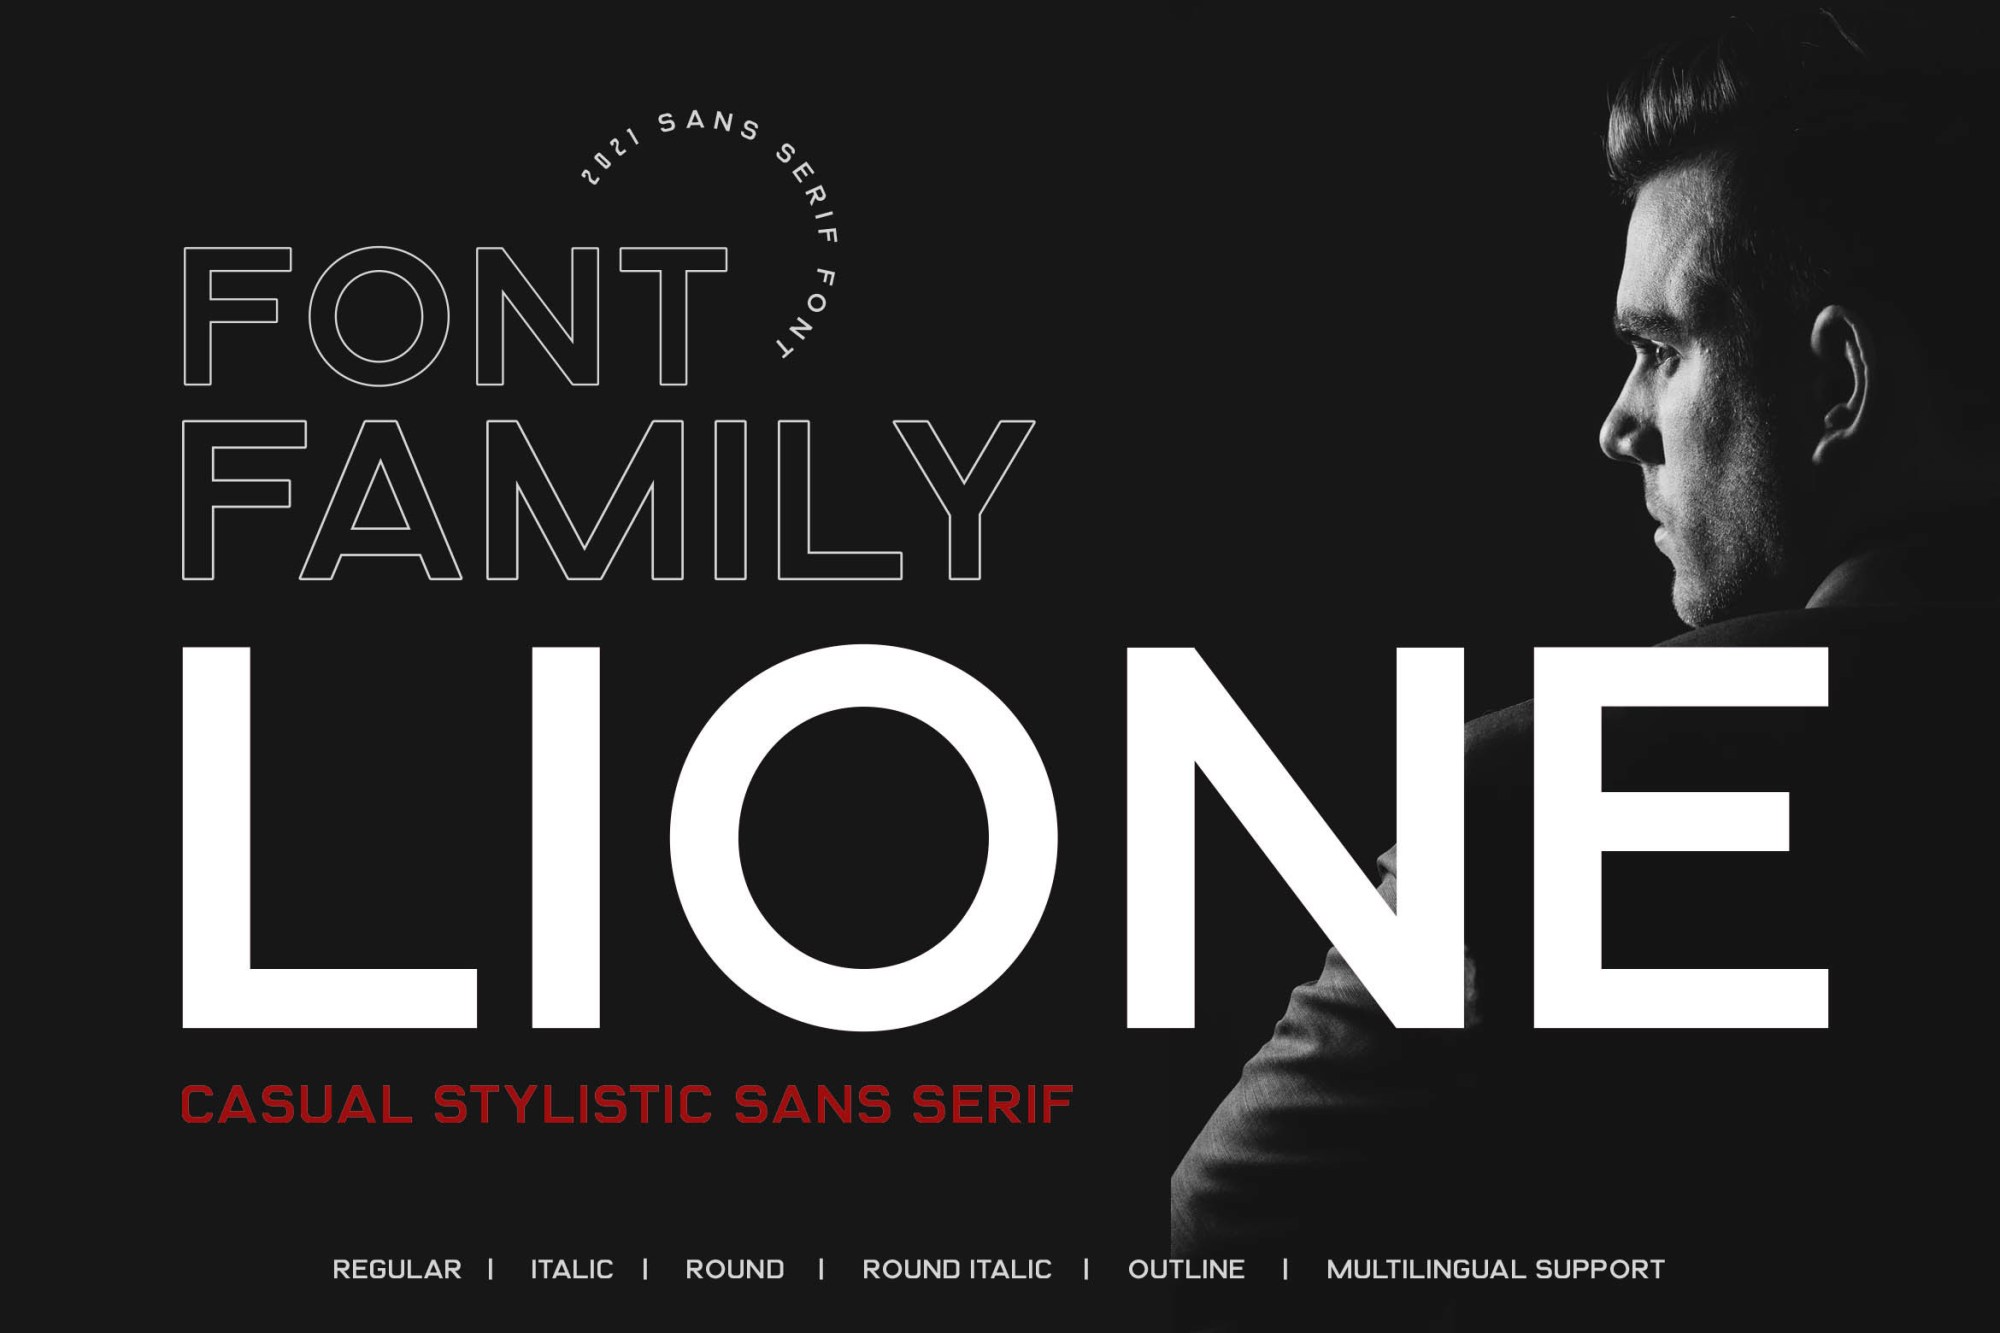 Lione Font Family